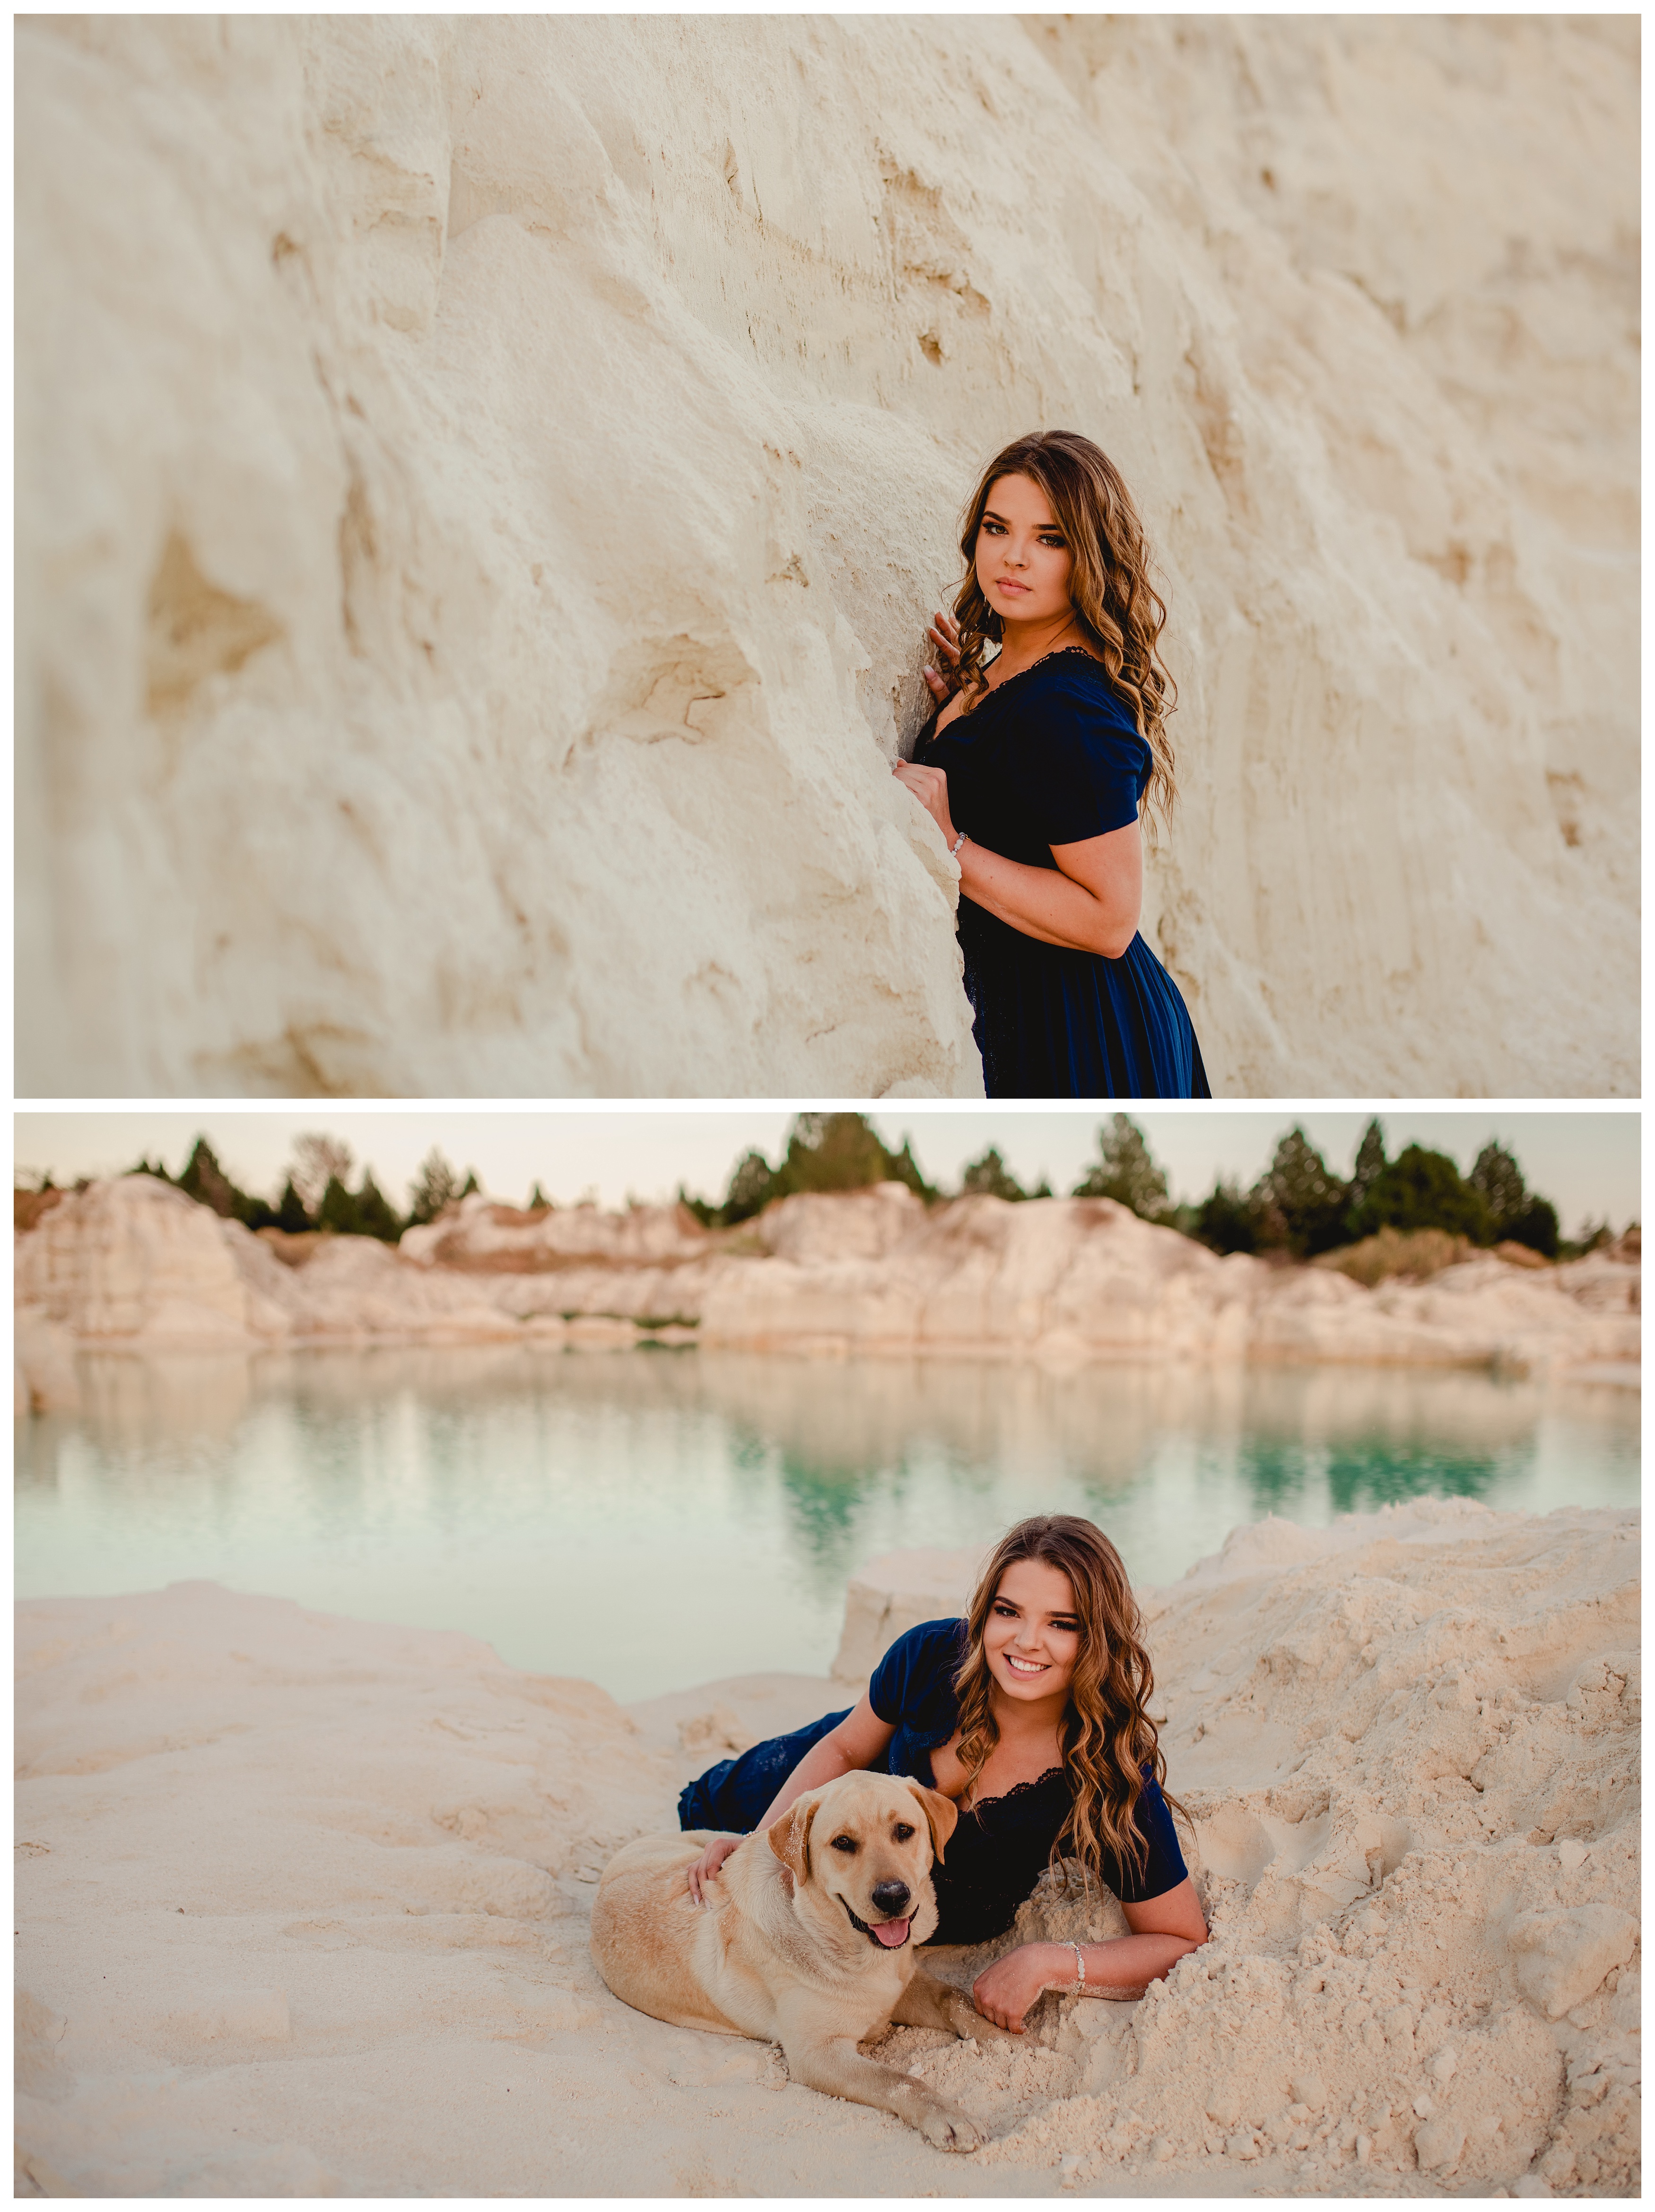 Senior photography with girls dog at special location in North Florida. Shelly Williams Photography